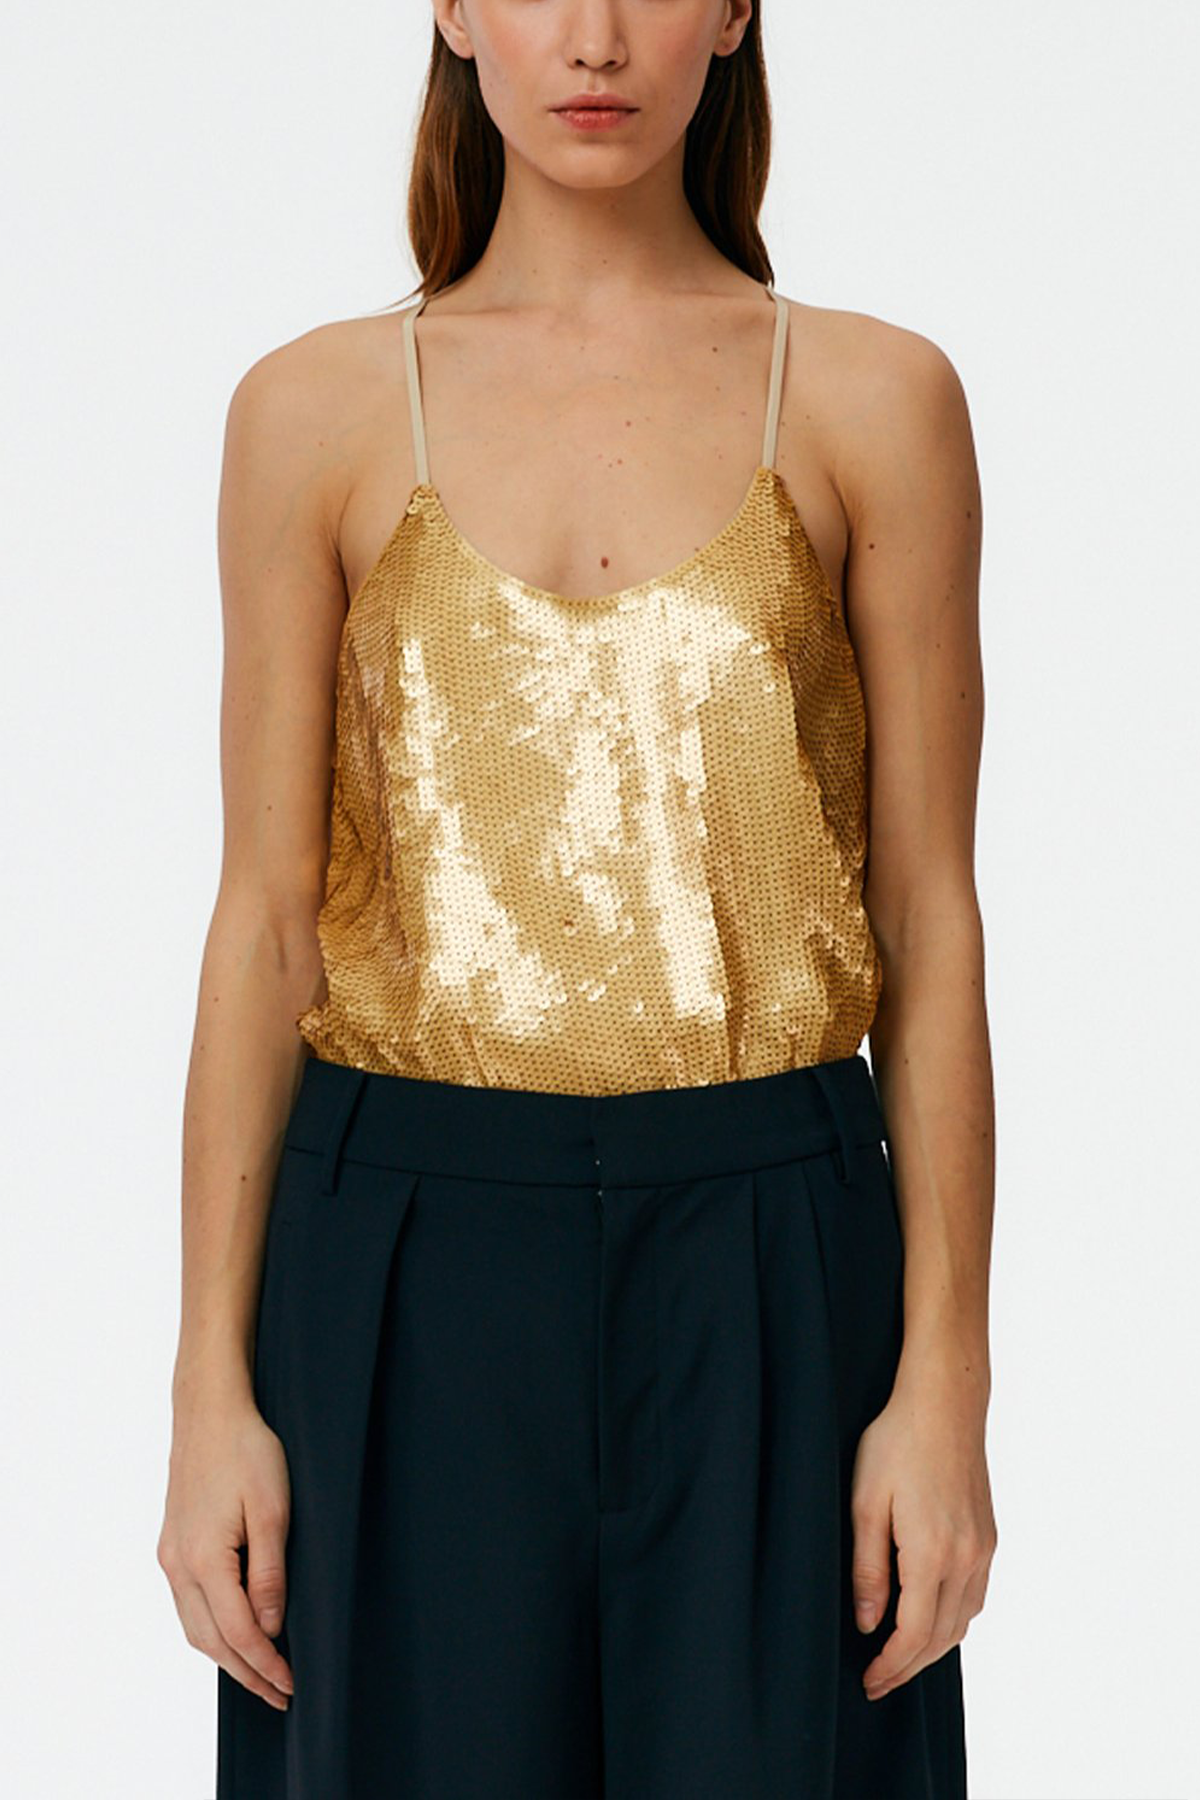 Eclair Sequins Beading Cami Top in Gold